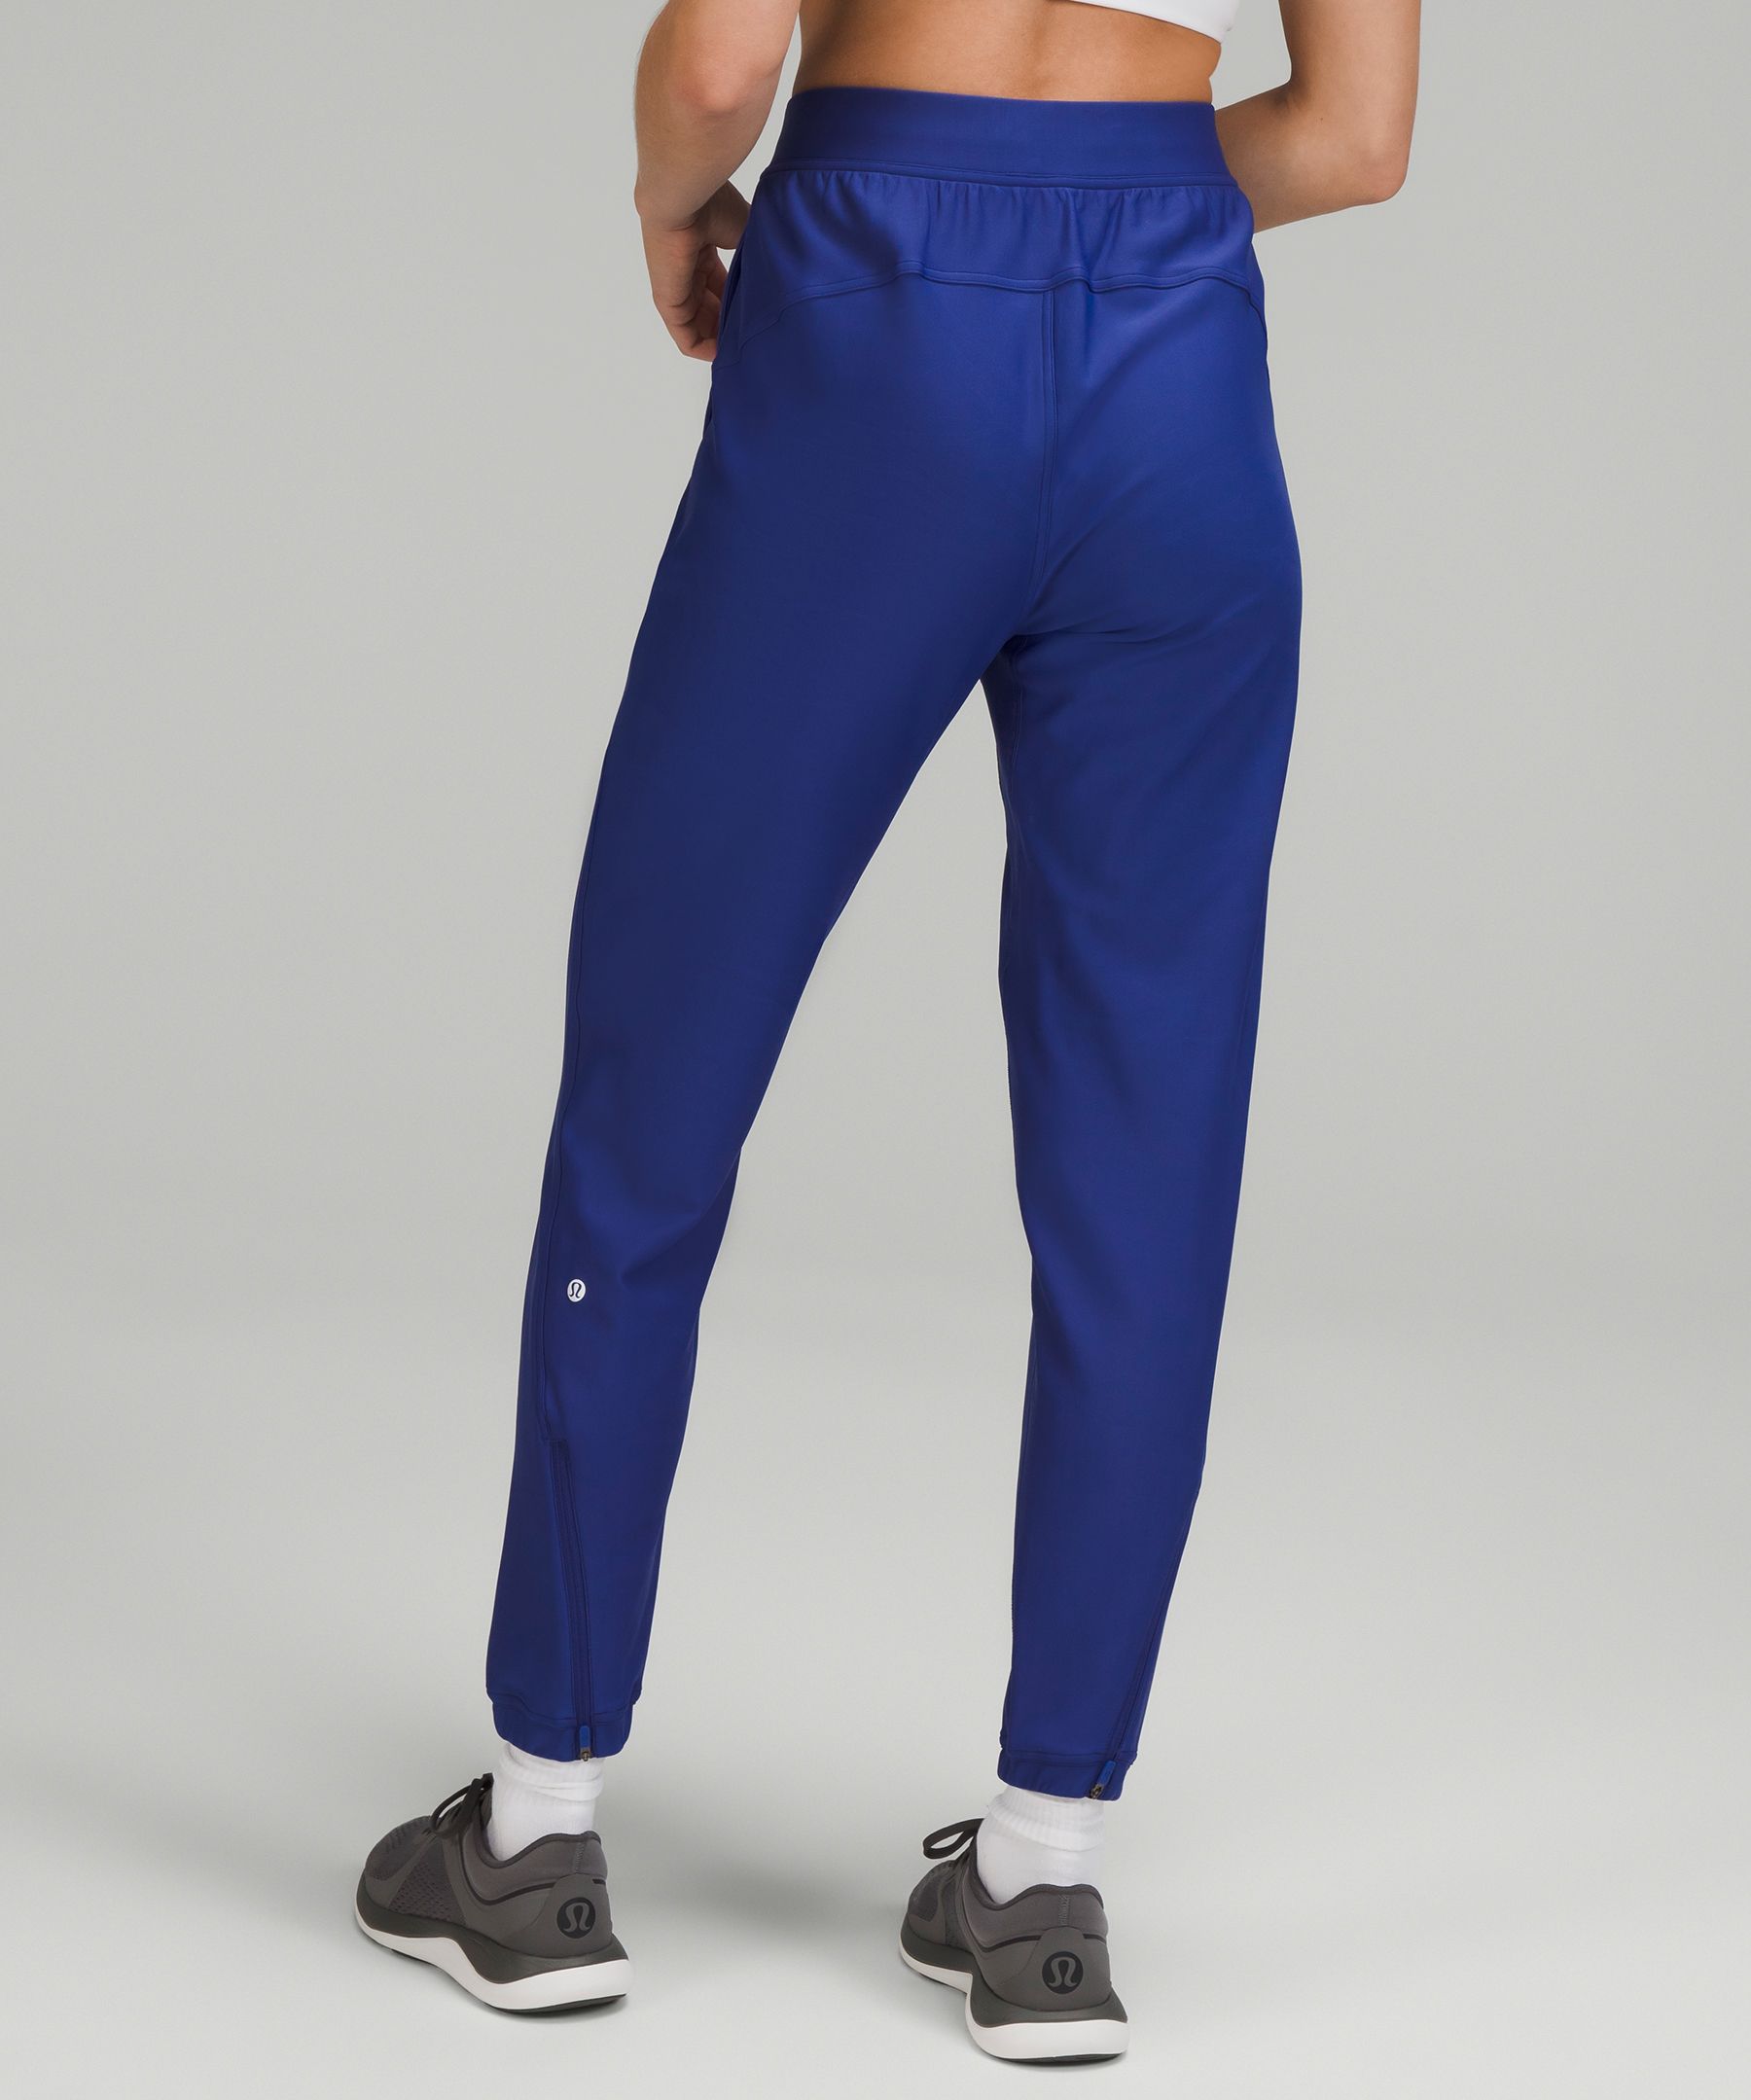 Lululemon Adapted State High Rise Jogger *Airflow - Retail $138